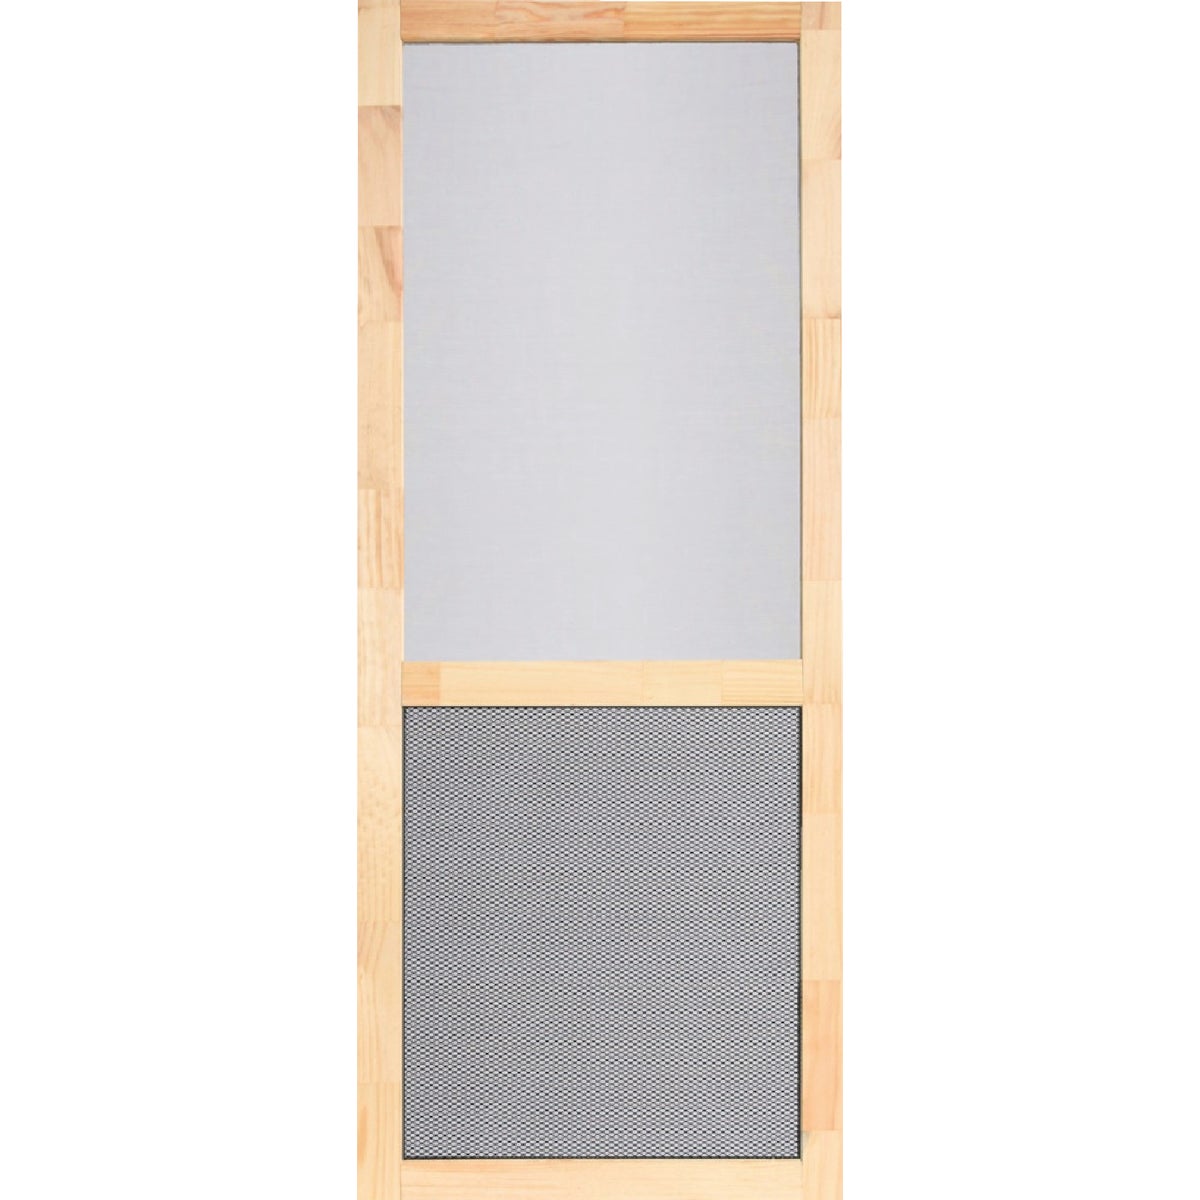 Screen Tight Century Pet Guard 36 In. W x 80 In. H x 1 1/8 In. Thick Natural Wood Screen Door